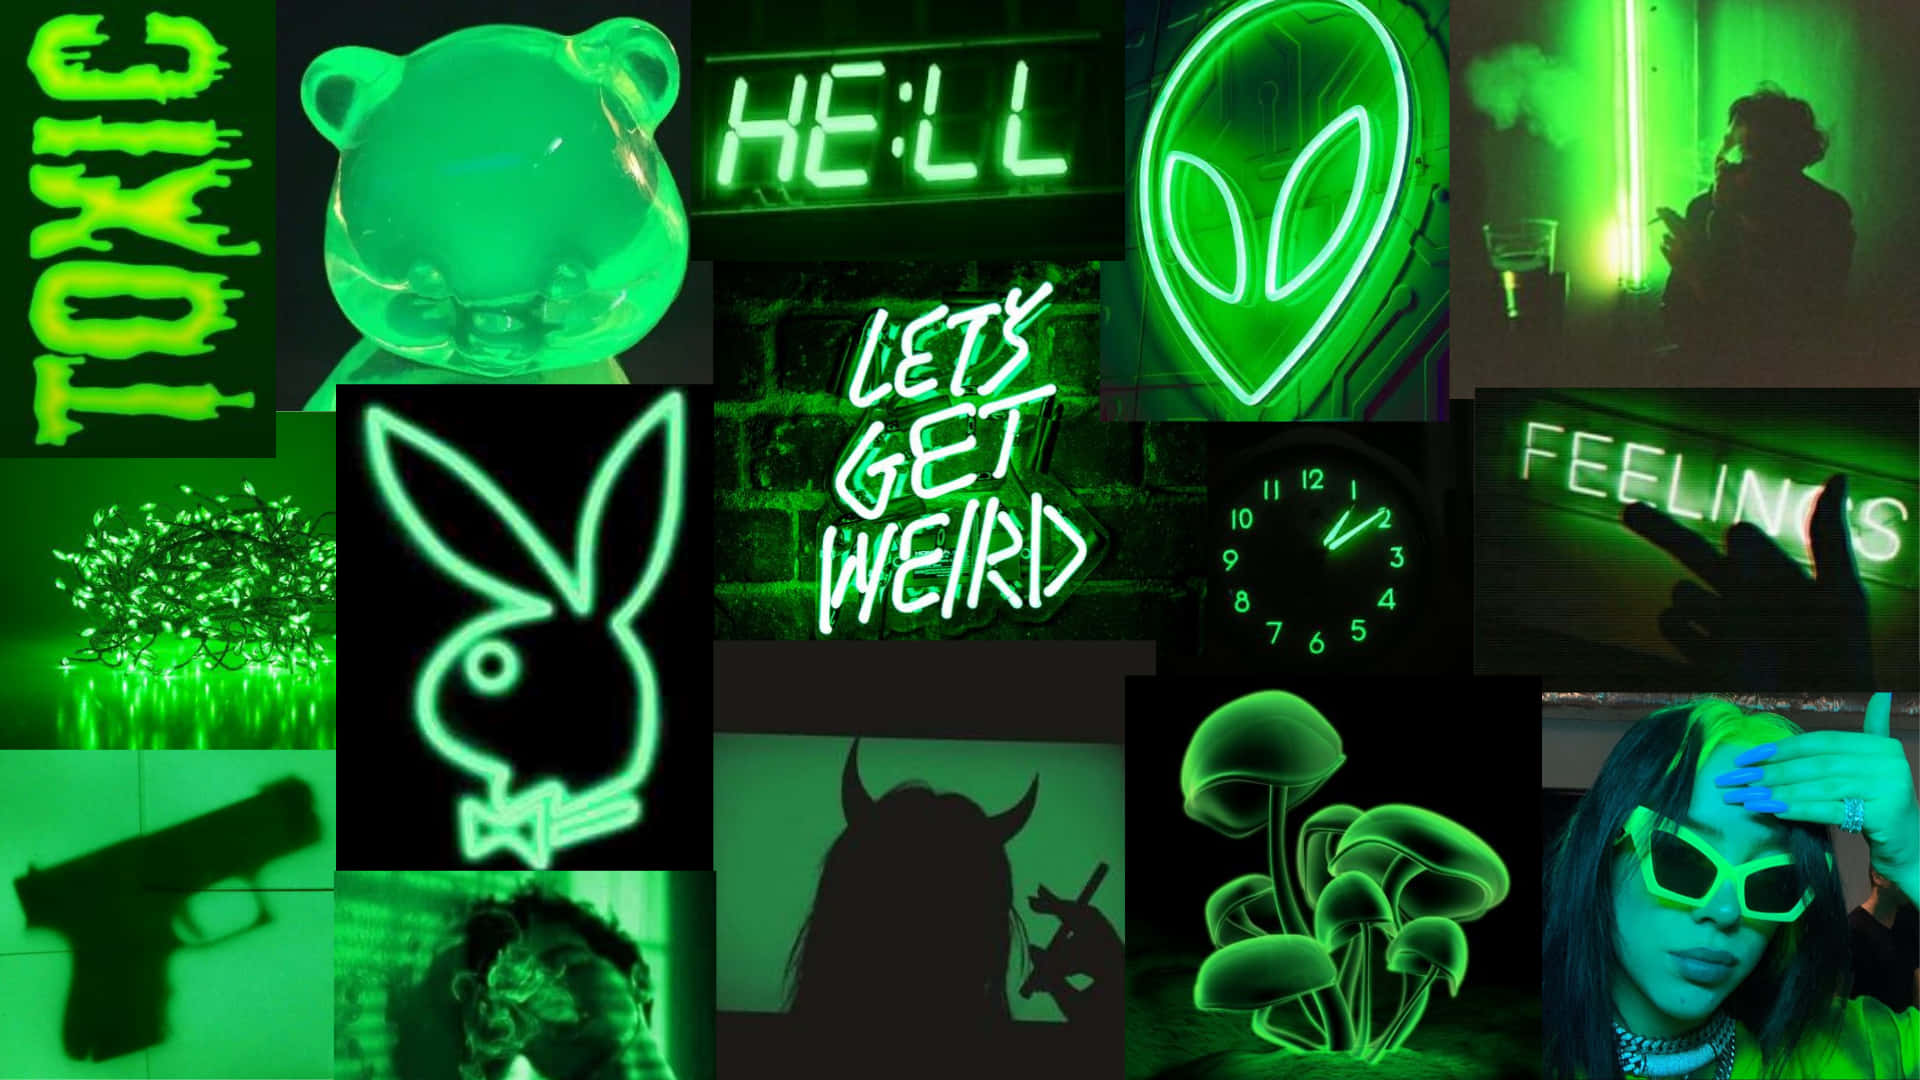 Feel the neon vibe and keep your desktop aesthetic with this Neon Green Aesthetic Desktop wallpaper. Wallpaper